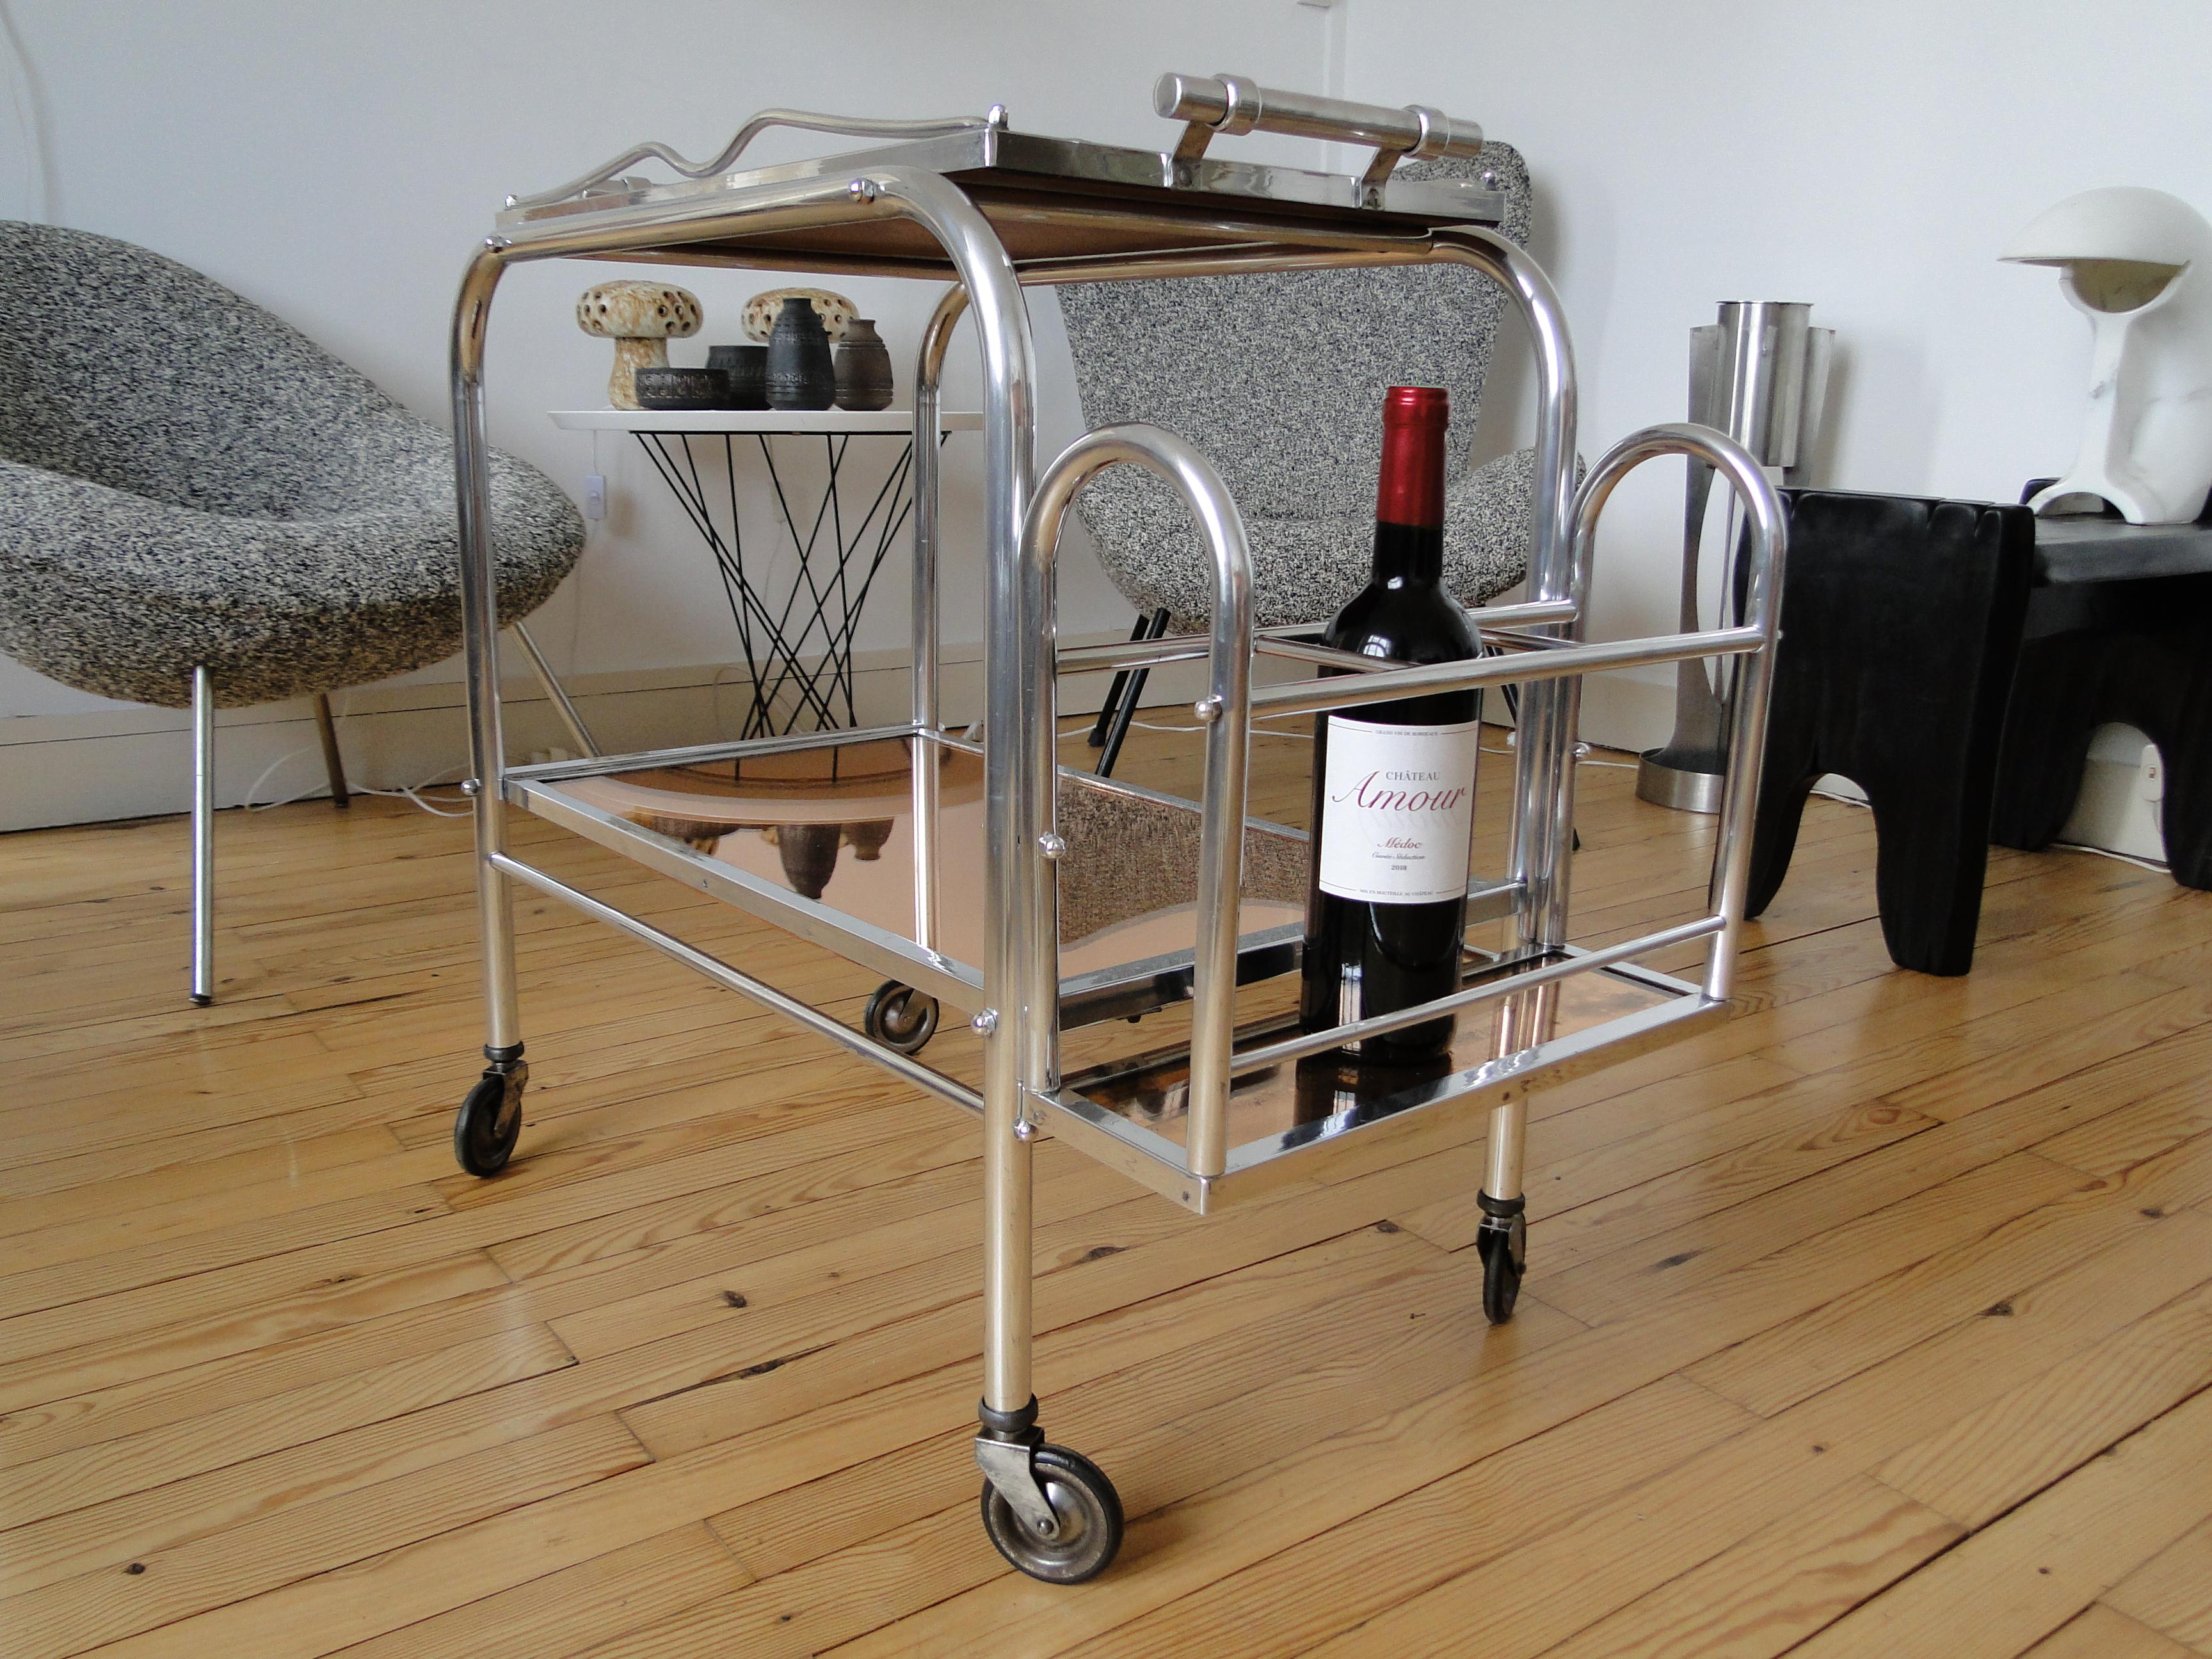 This magnificent Jacques Adnet bar cart comes from a Chateau in the Medoc 

near Bordeaux in the South West of France where it has been since the 1950s

The glass of the tray still bears the date of the order of the glass

It has been